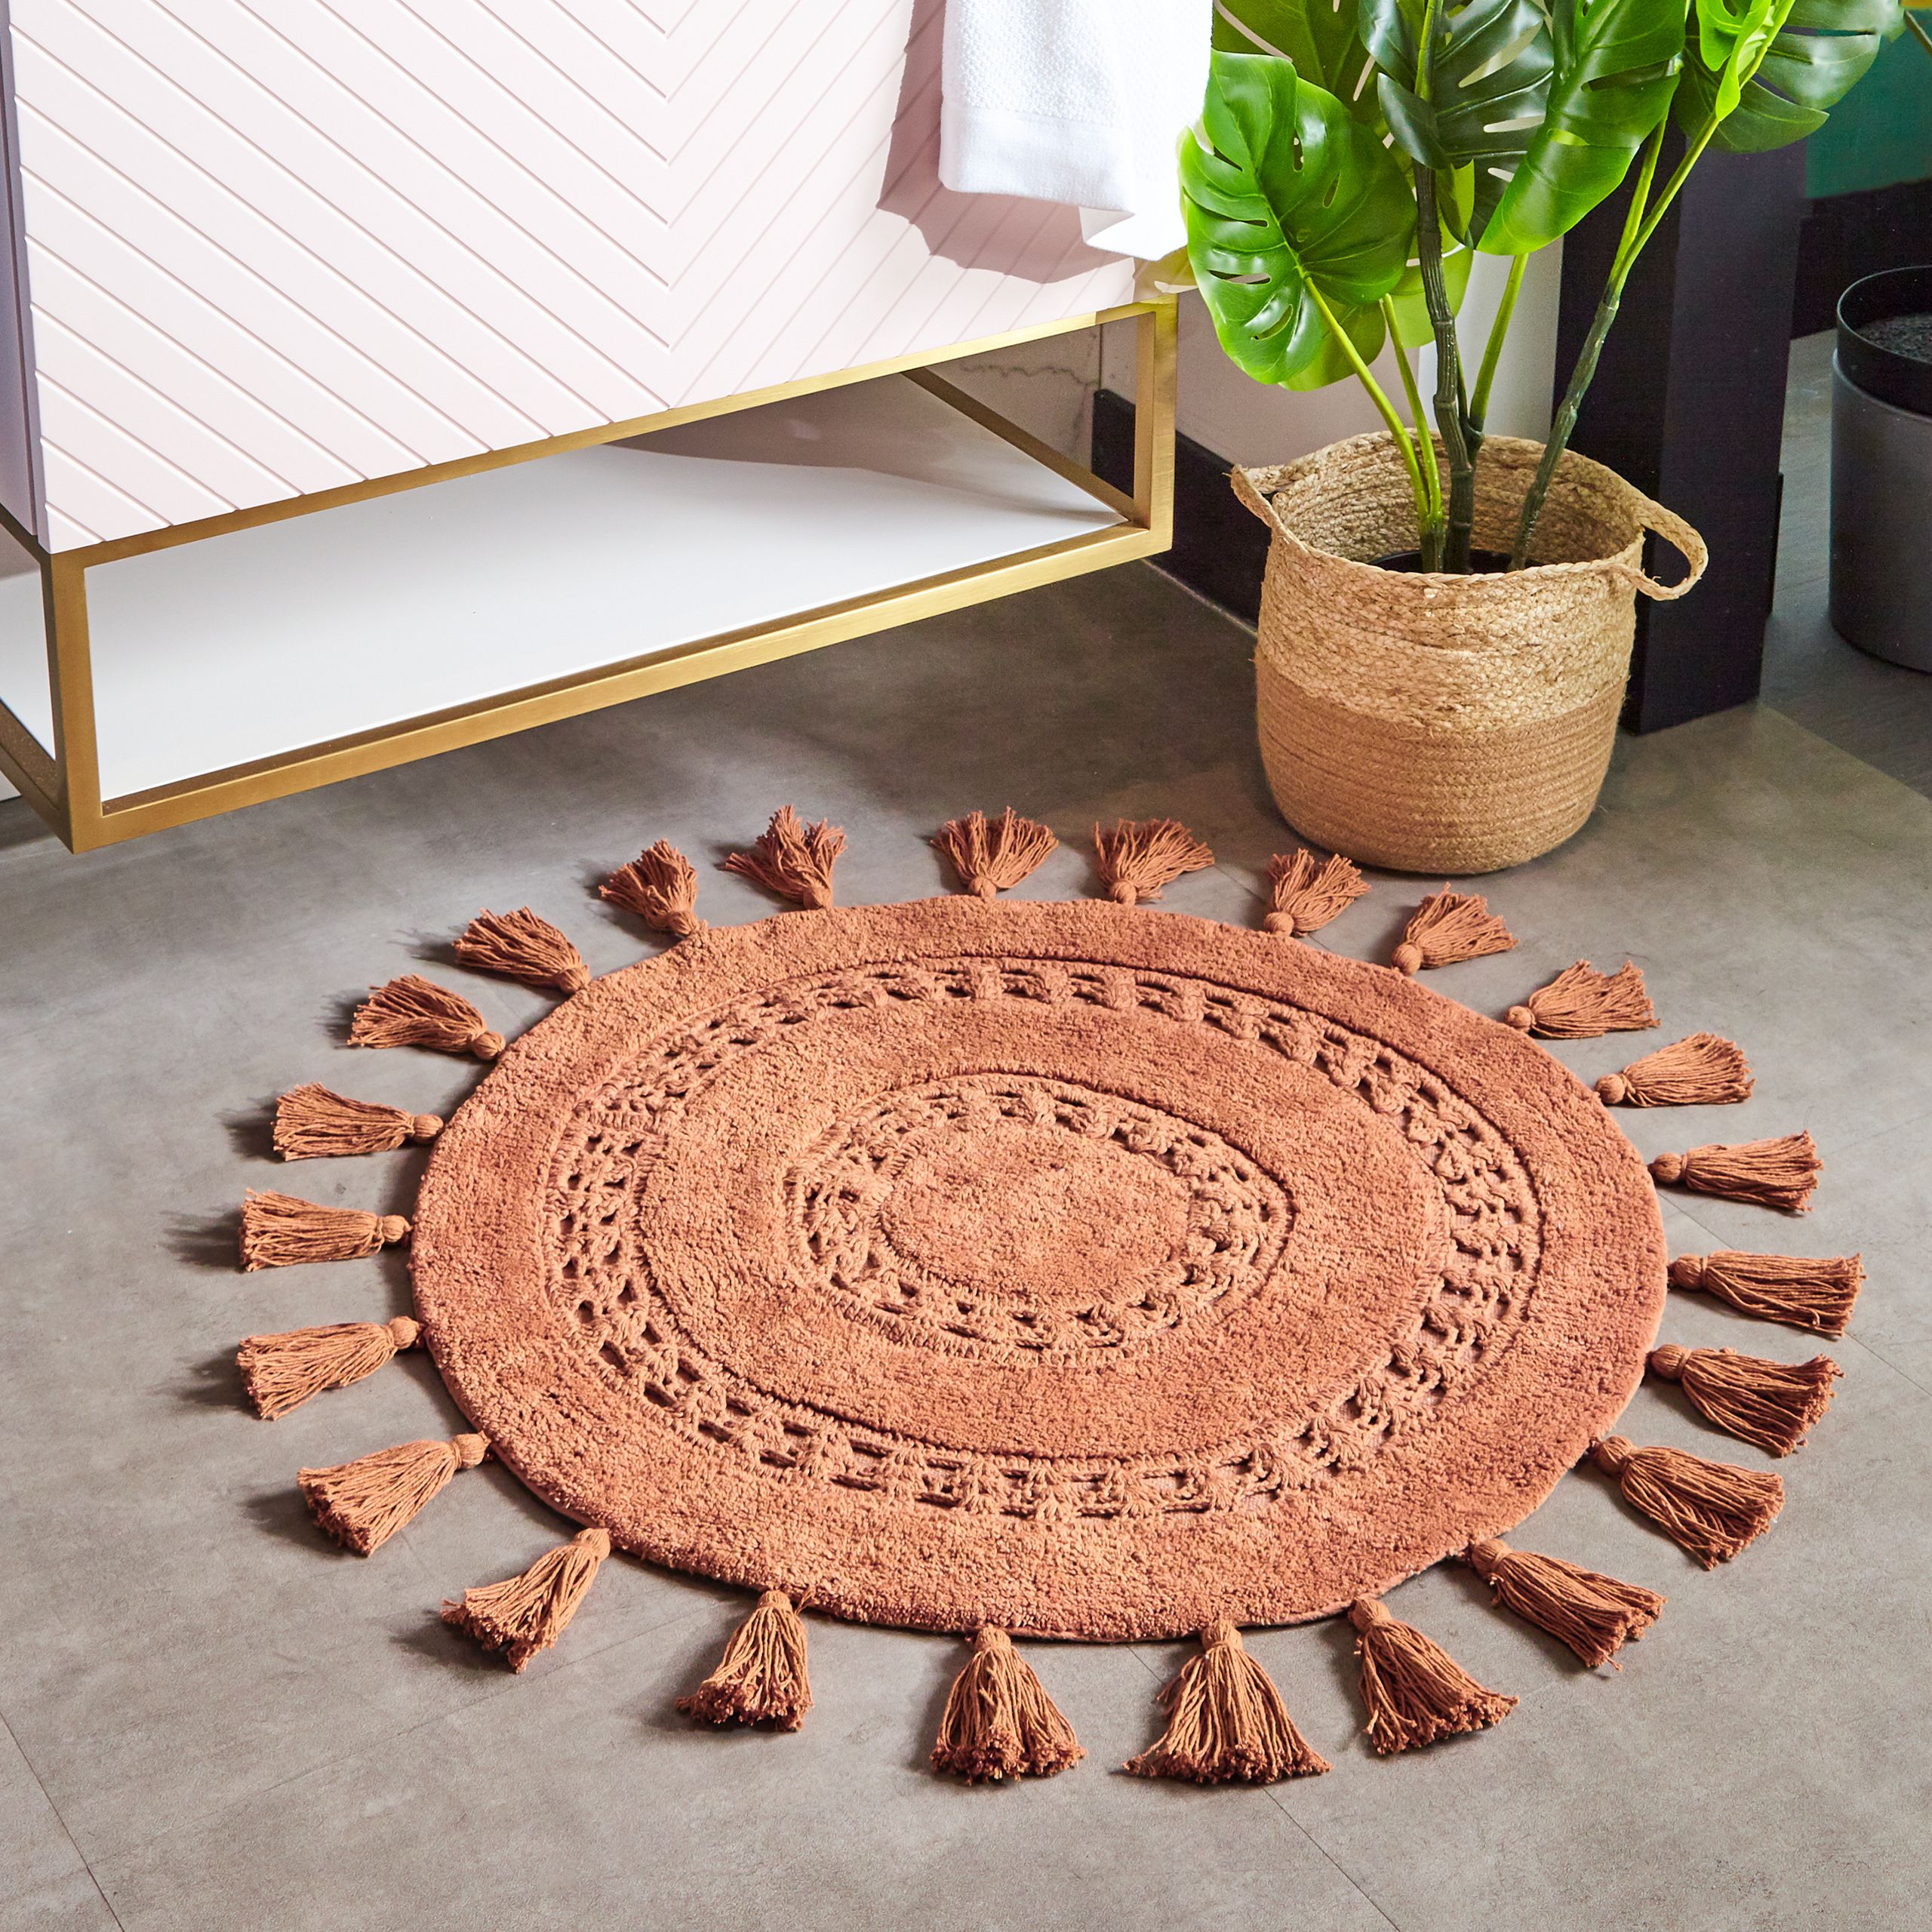 Featuring an intricate mandala woven design, complete with a chunky tasselled trim. Made from 100% Cotton, making this bath mat incredibly soft under foot. This bath mat has an anti-slip quality, keeping it securely in place on your bathroom floor. The 1950 GSM ensures this bath mat is super absorbent preventing post-bath or shower puddles.